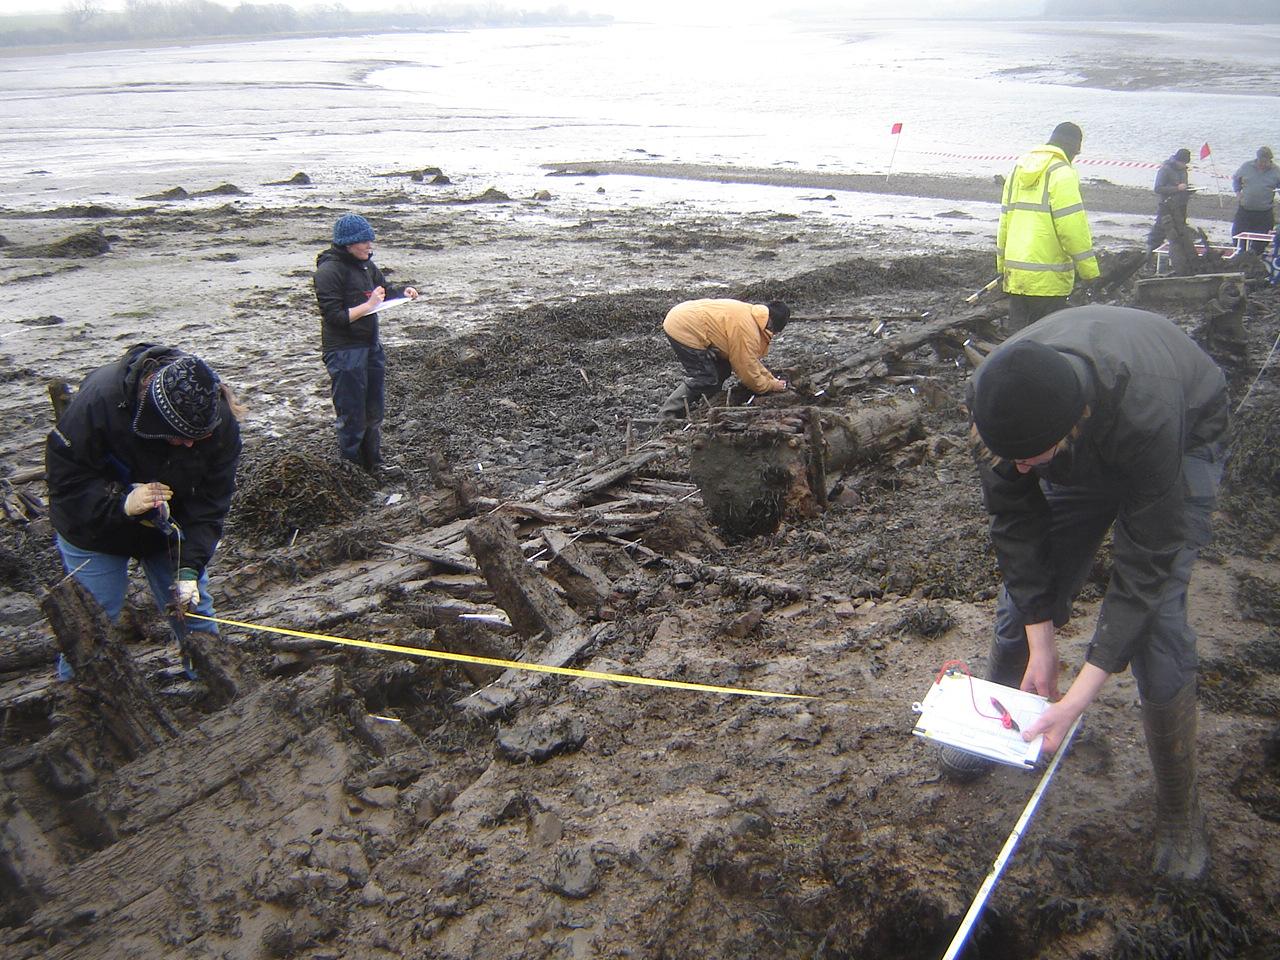 Volunteers from the Dyfed Archaeological Trust carrying out an Offset Survey exercise on the wreck of the Helping Hand